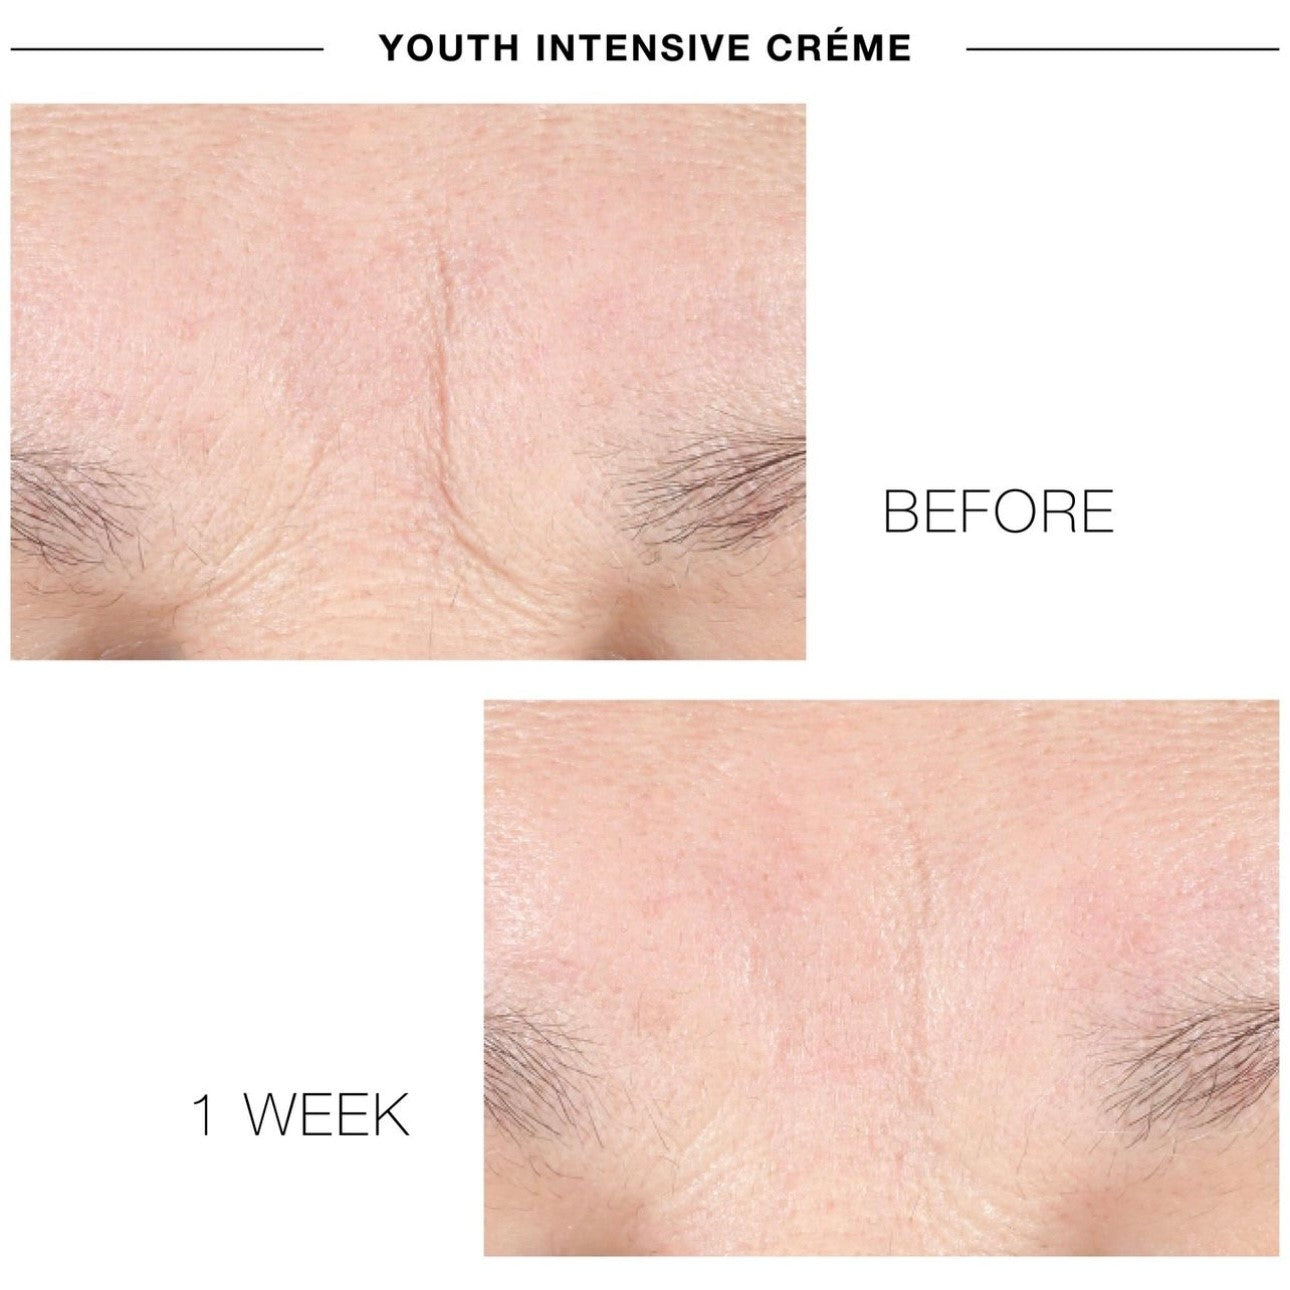 YOUTH INTENSIVE CREME